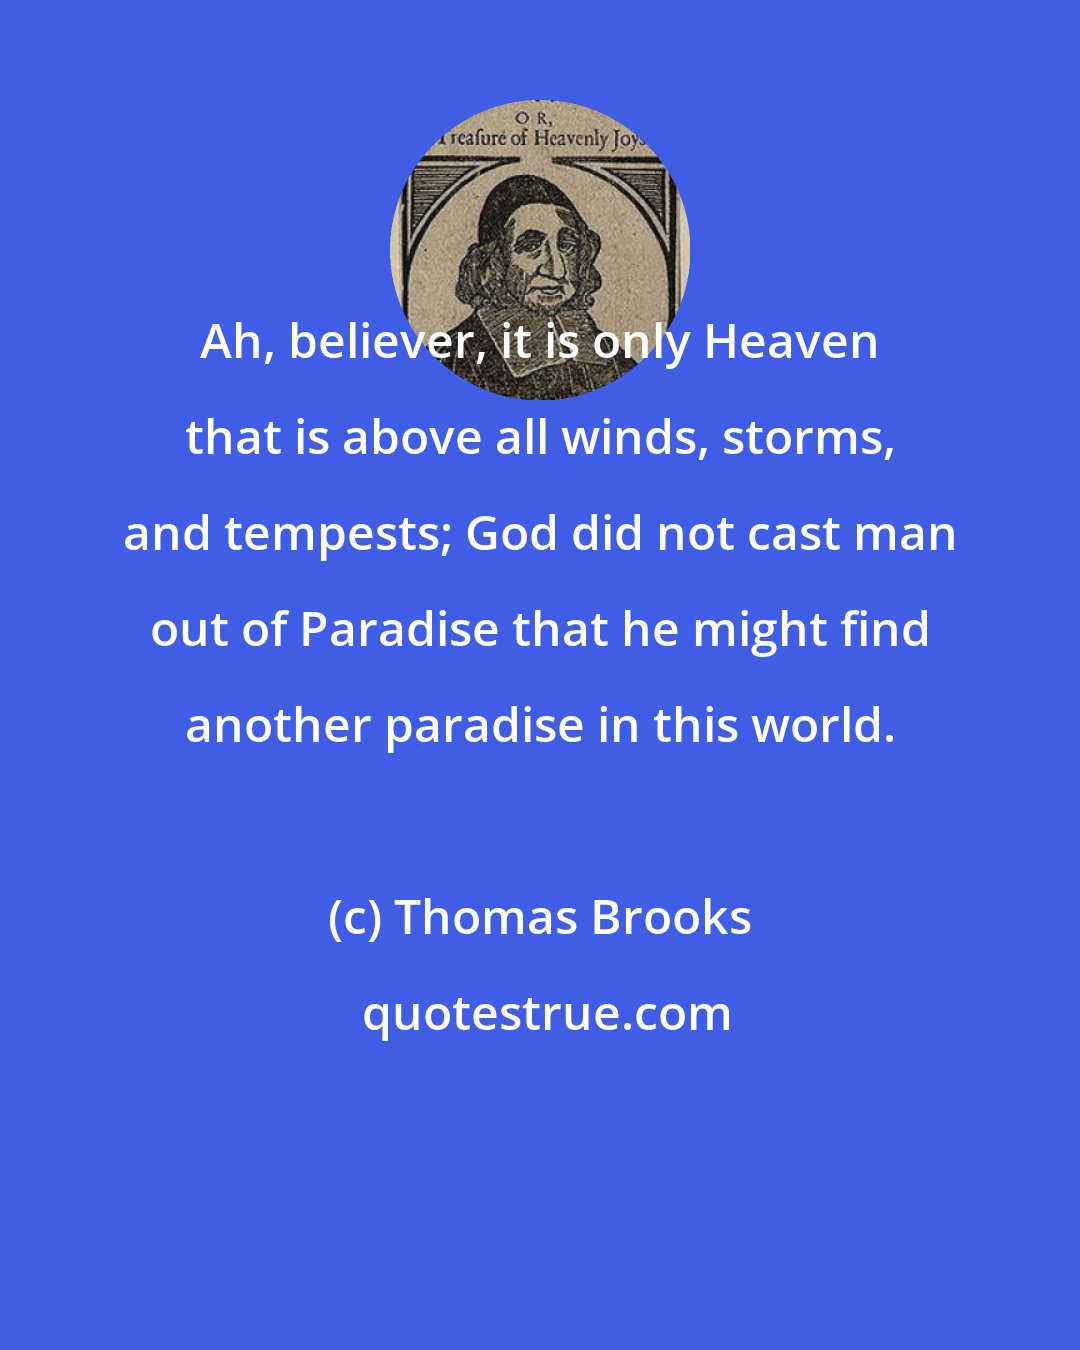 Thomas Brooks: Ah, believer, it is only Heaven that is above all winds, storms, and tempests; God did not cast man out of Paradise that he might find another paradise in this world.